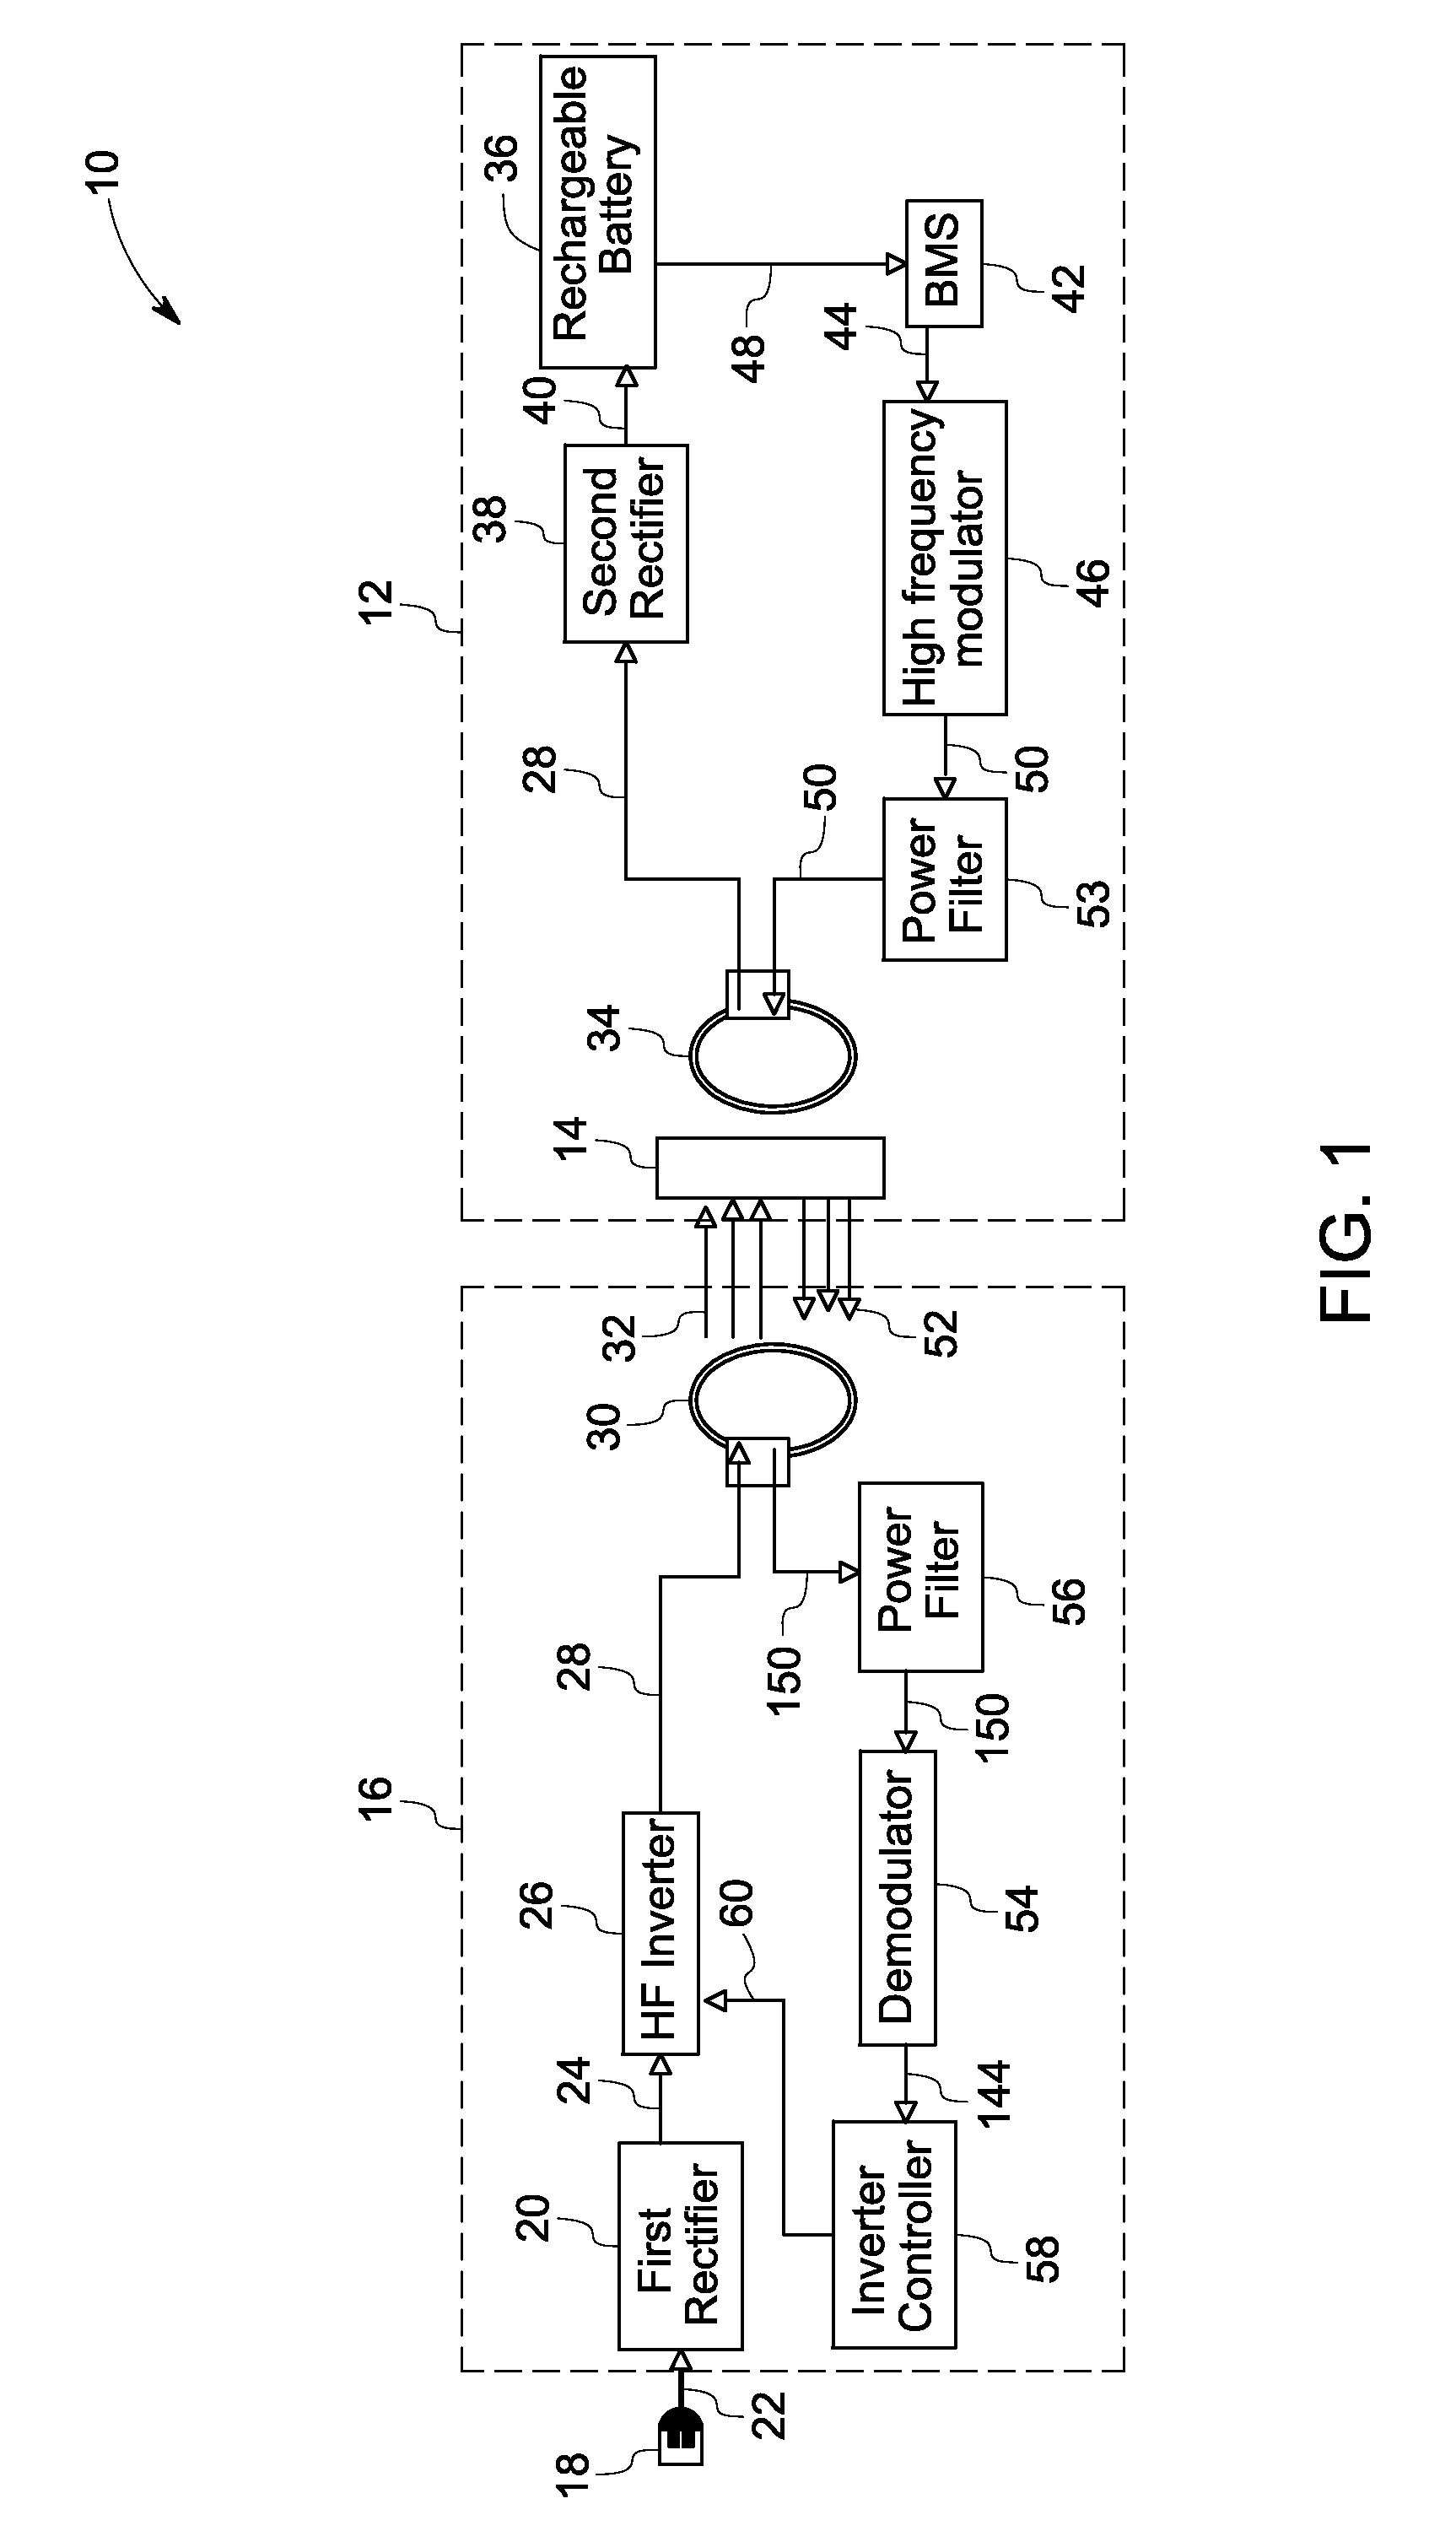 System and method for contactless power transfer in implantable devices